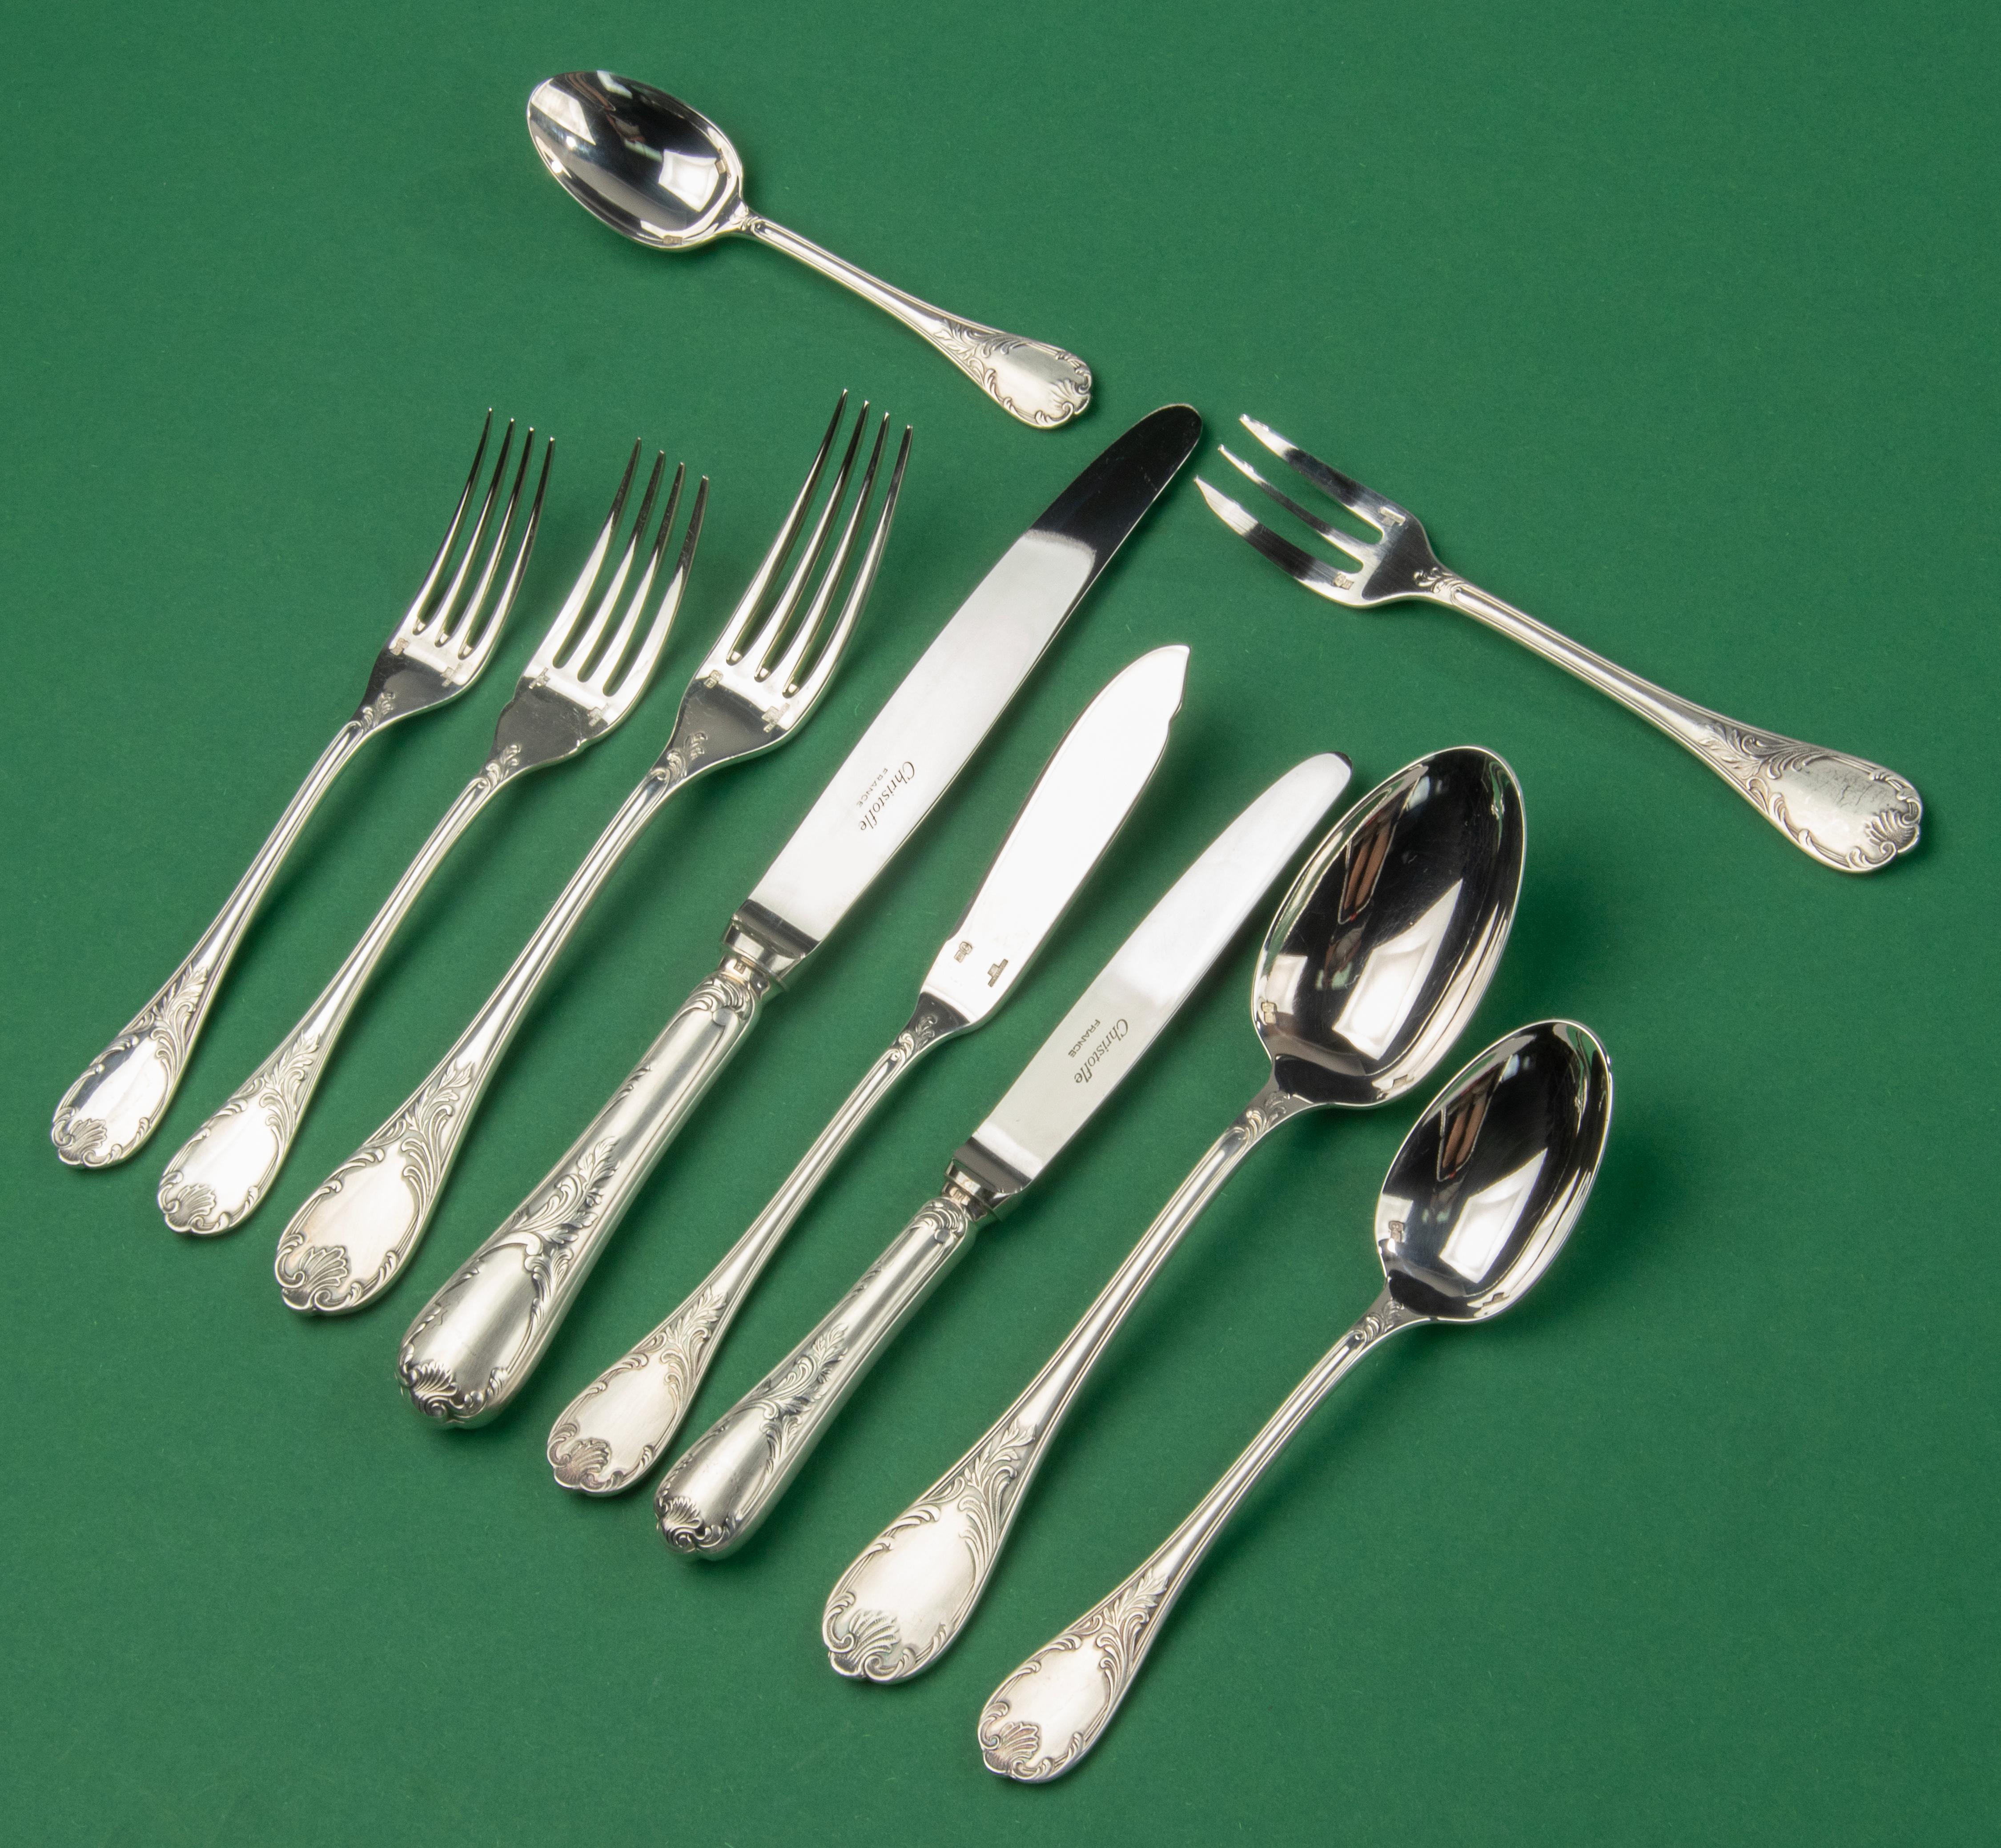 A great set of silver plated tableware for 12 persons, made by the French brand Christofle. 
The name of the model is Marly. 
- 12 table knives
- 12 table forks
- 12 table spoons 
- 12 lunch / dessert knives
- 12 lunch / dessert spoons
- 12 lunch /